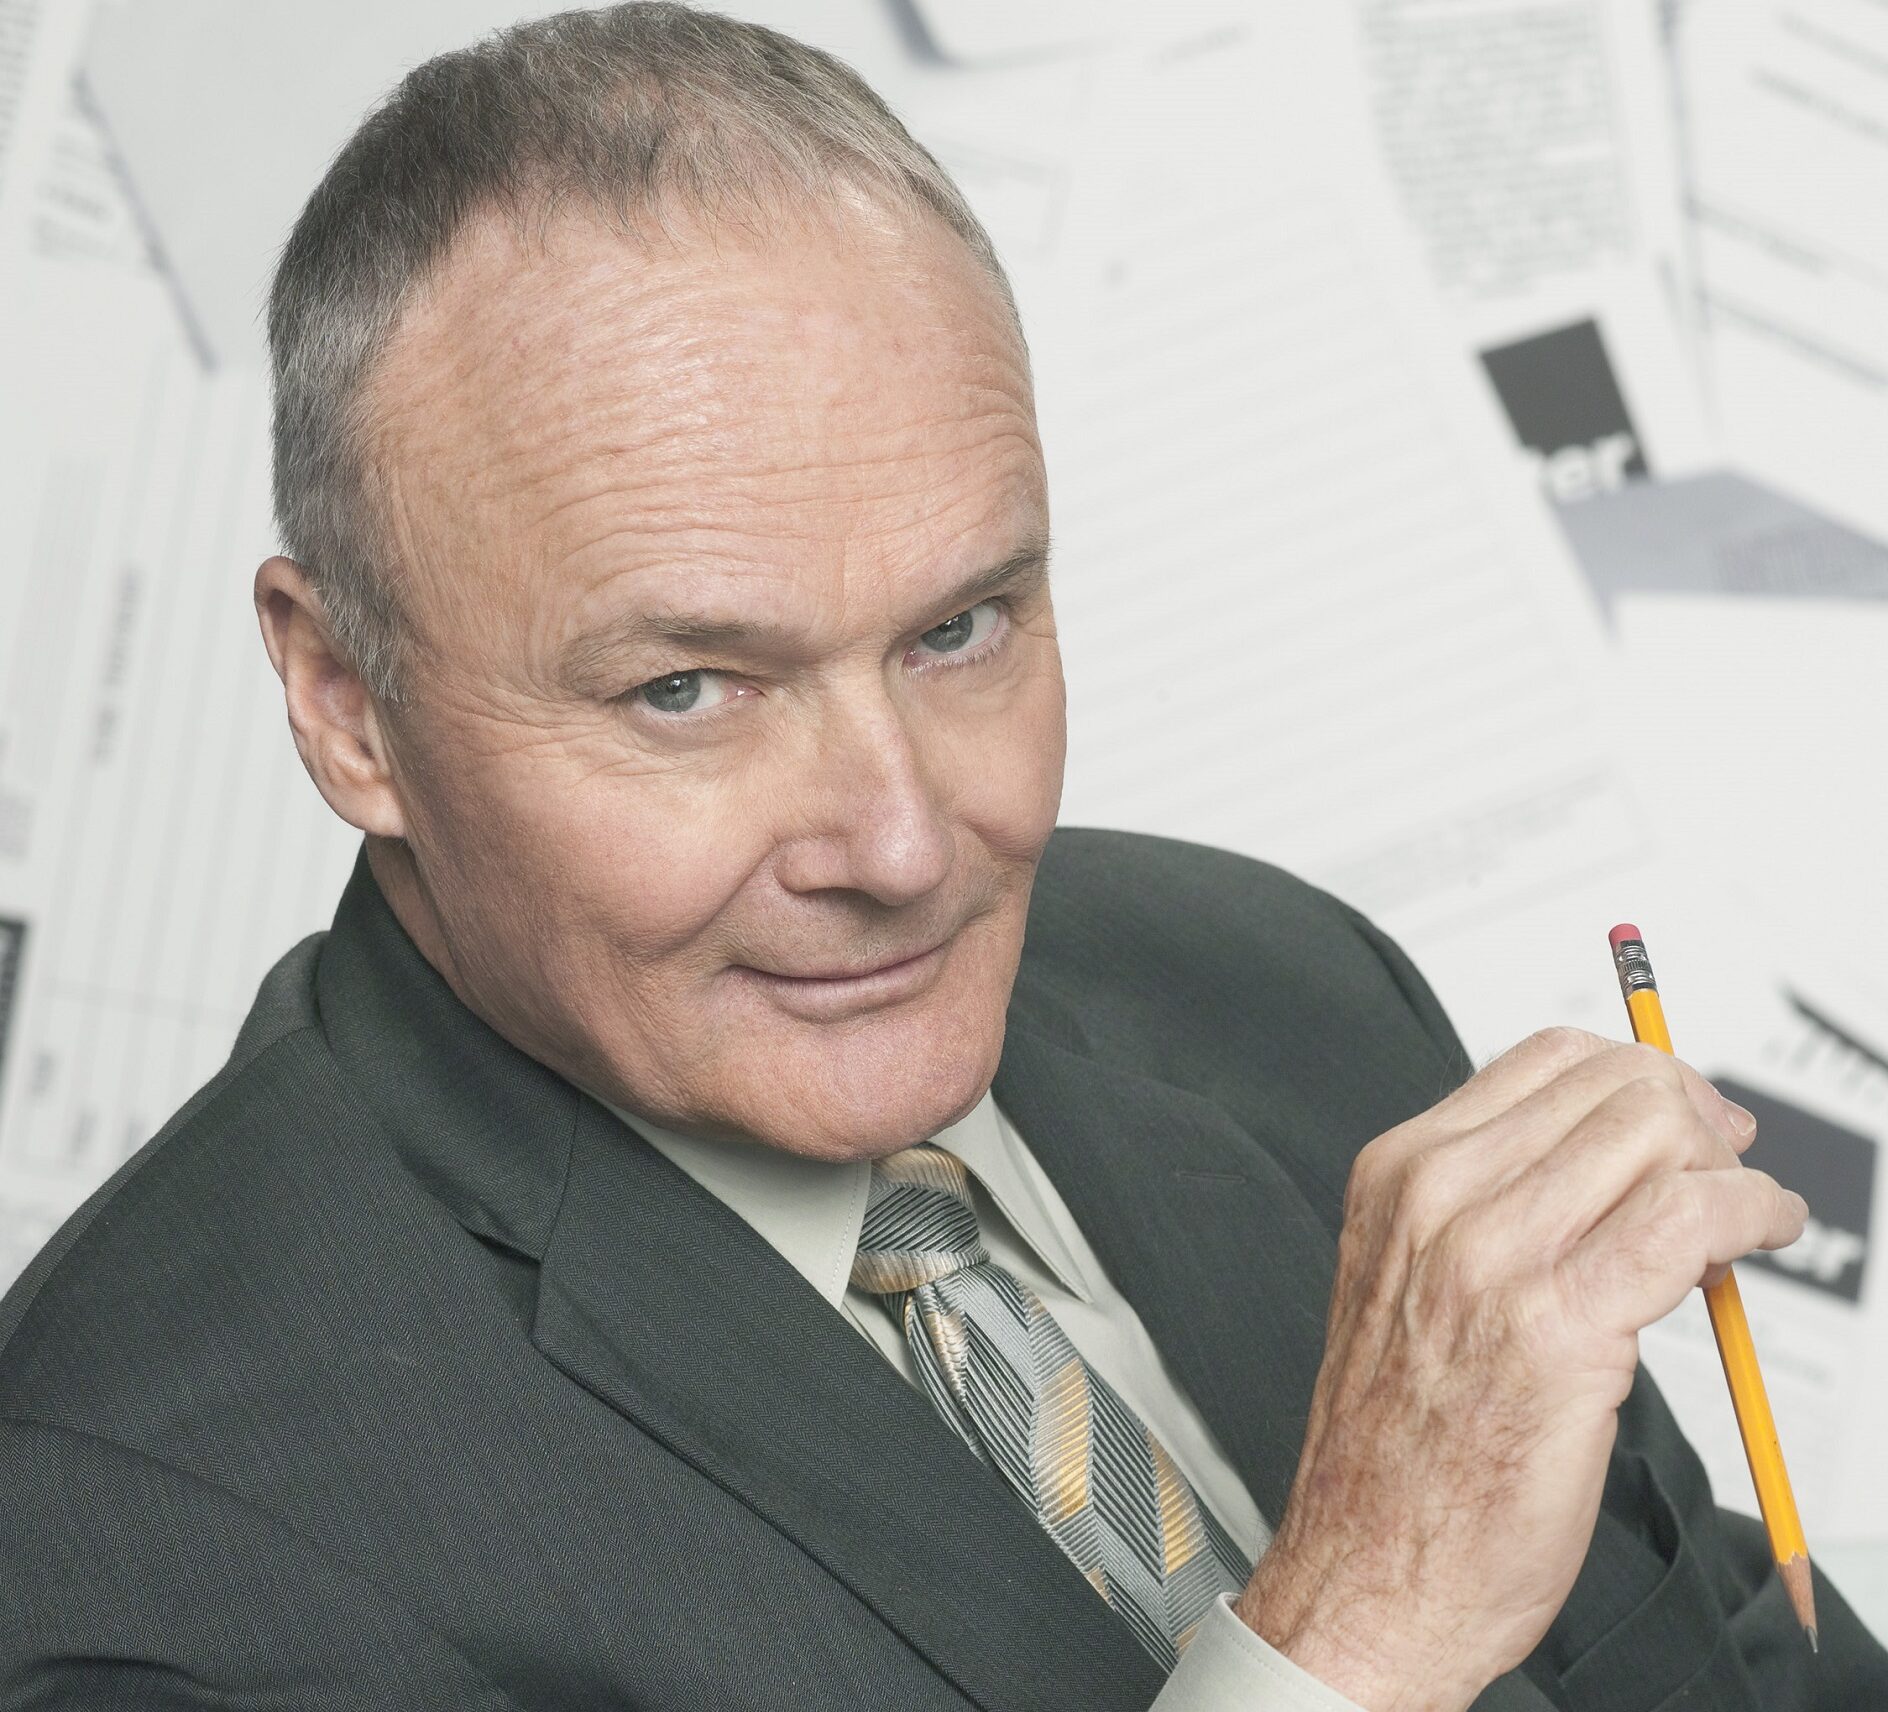 Creed Bratton from The Office